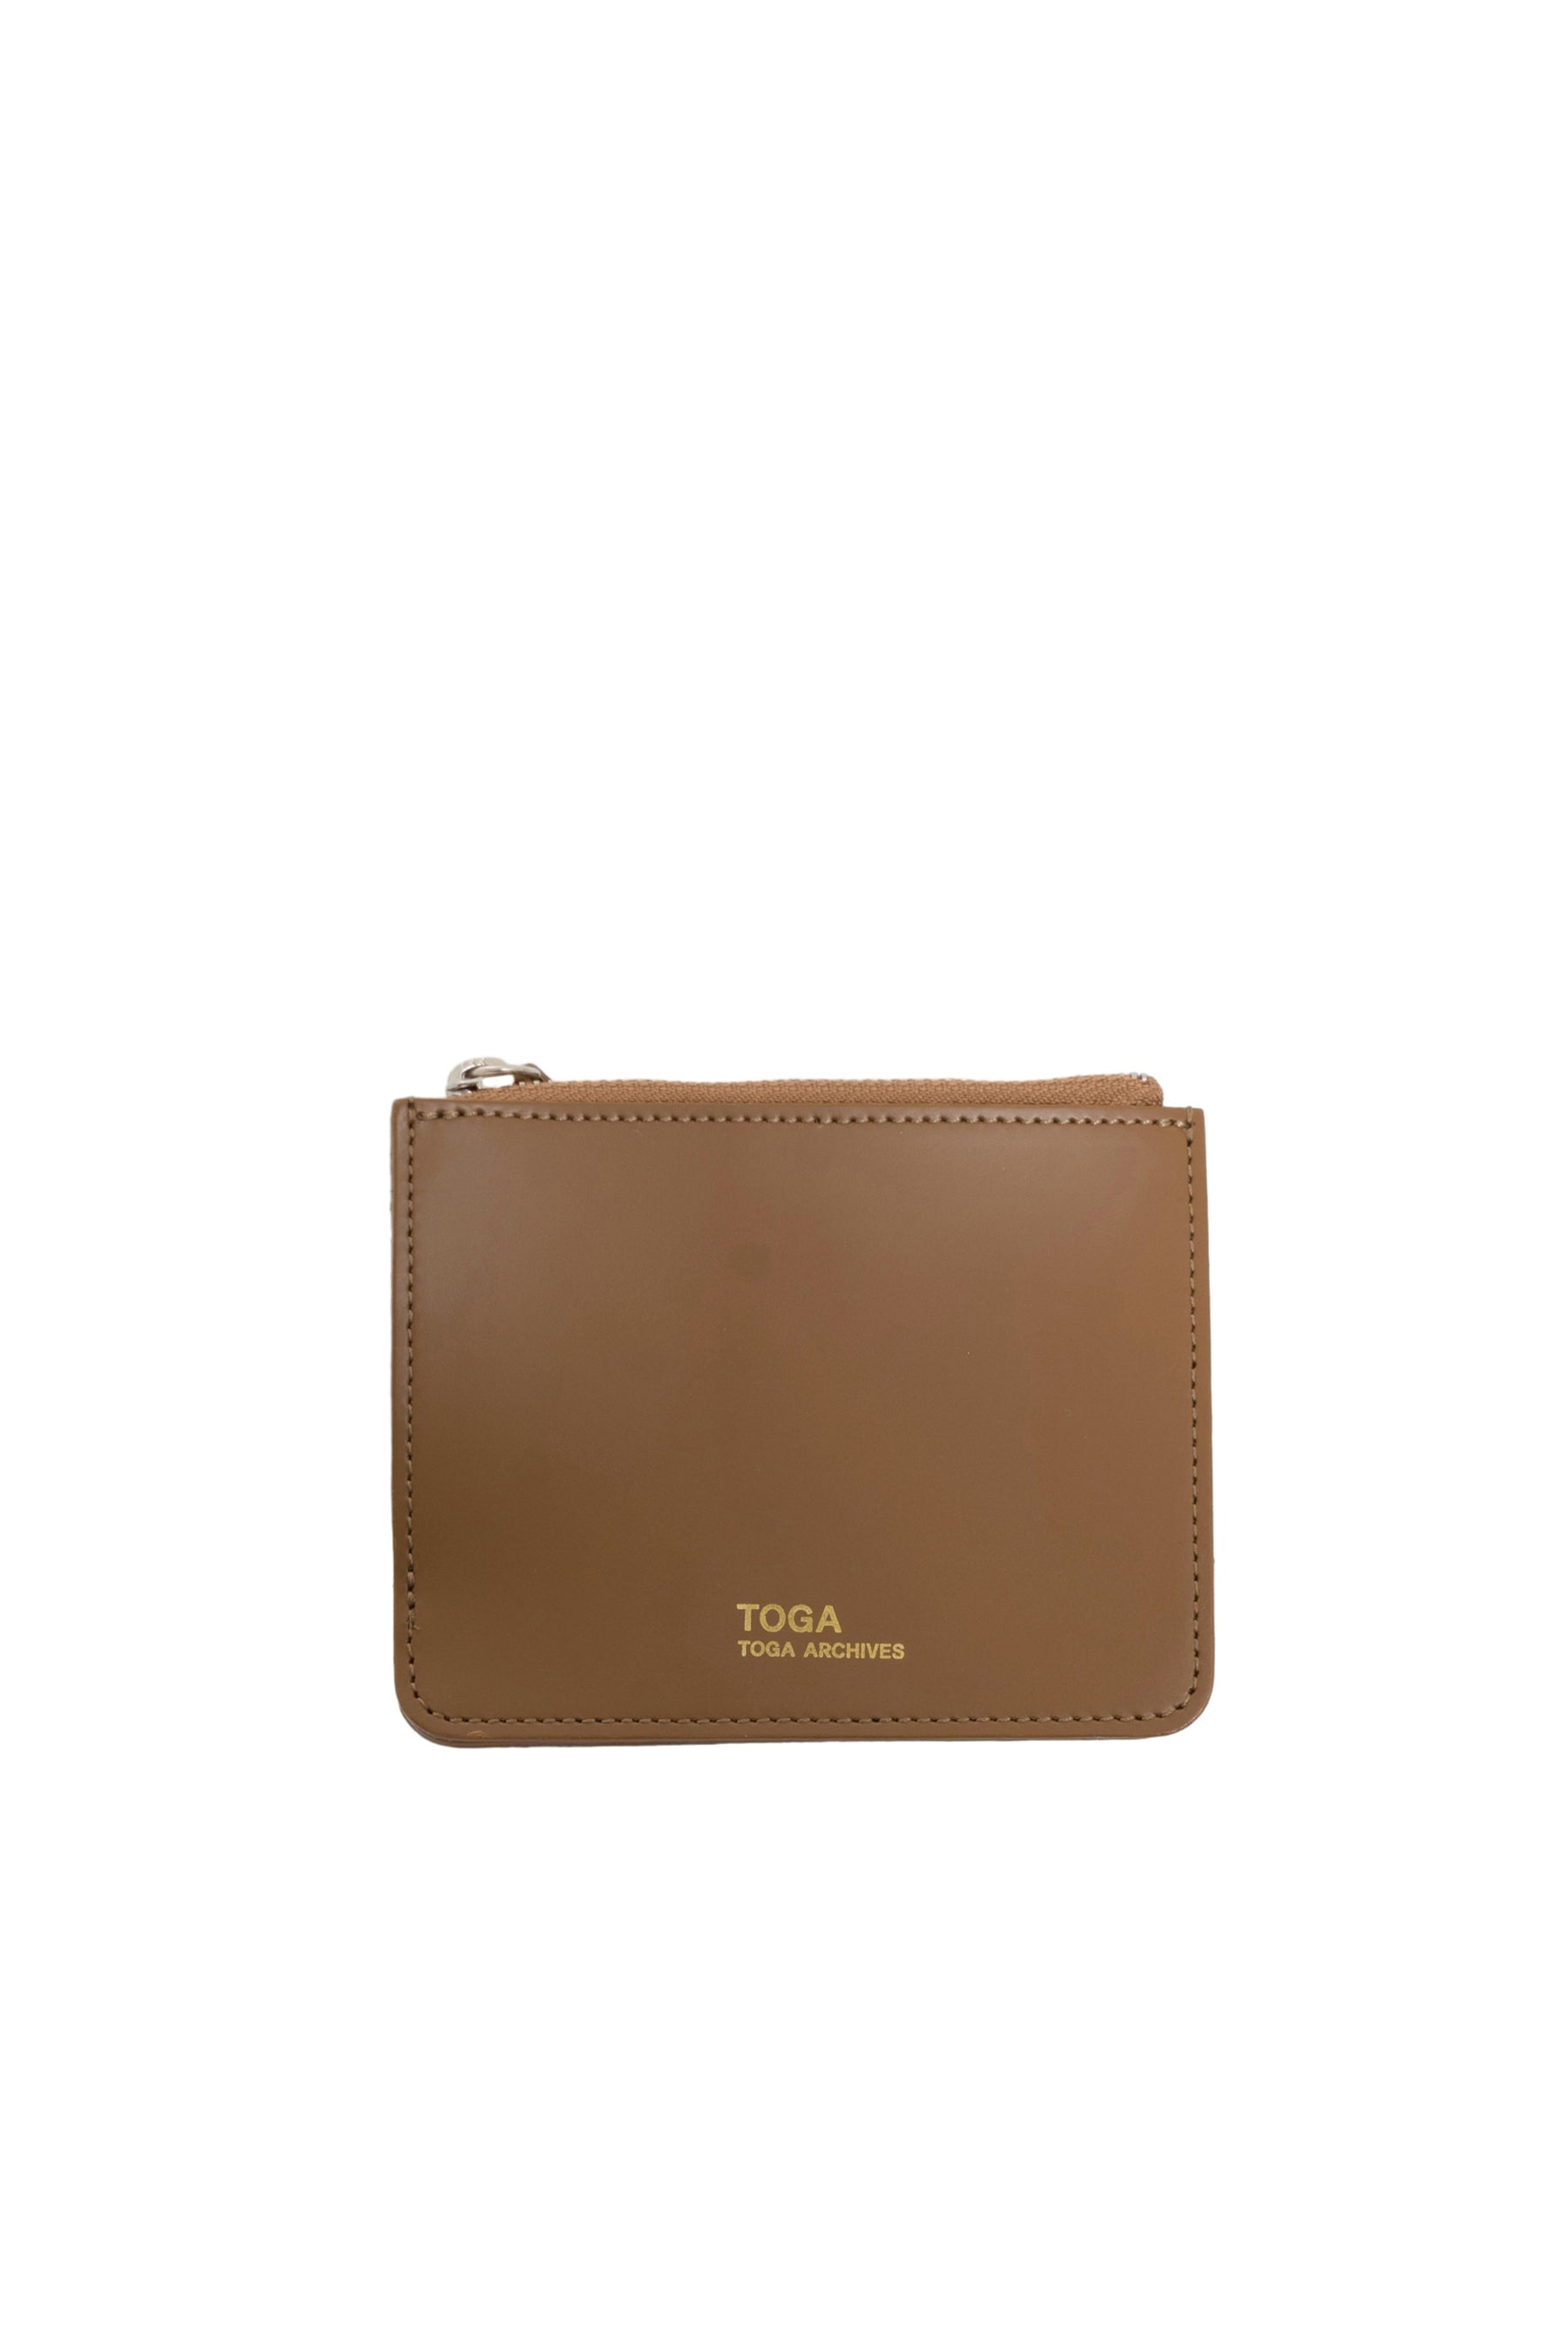 TOGA SS23 LEATHER WALLET / CAMEL -NUBIAN